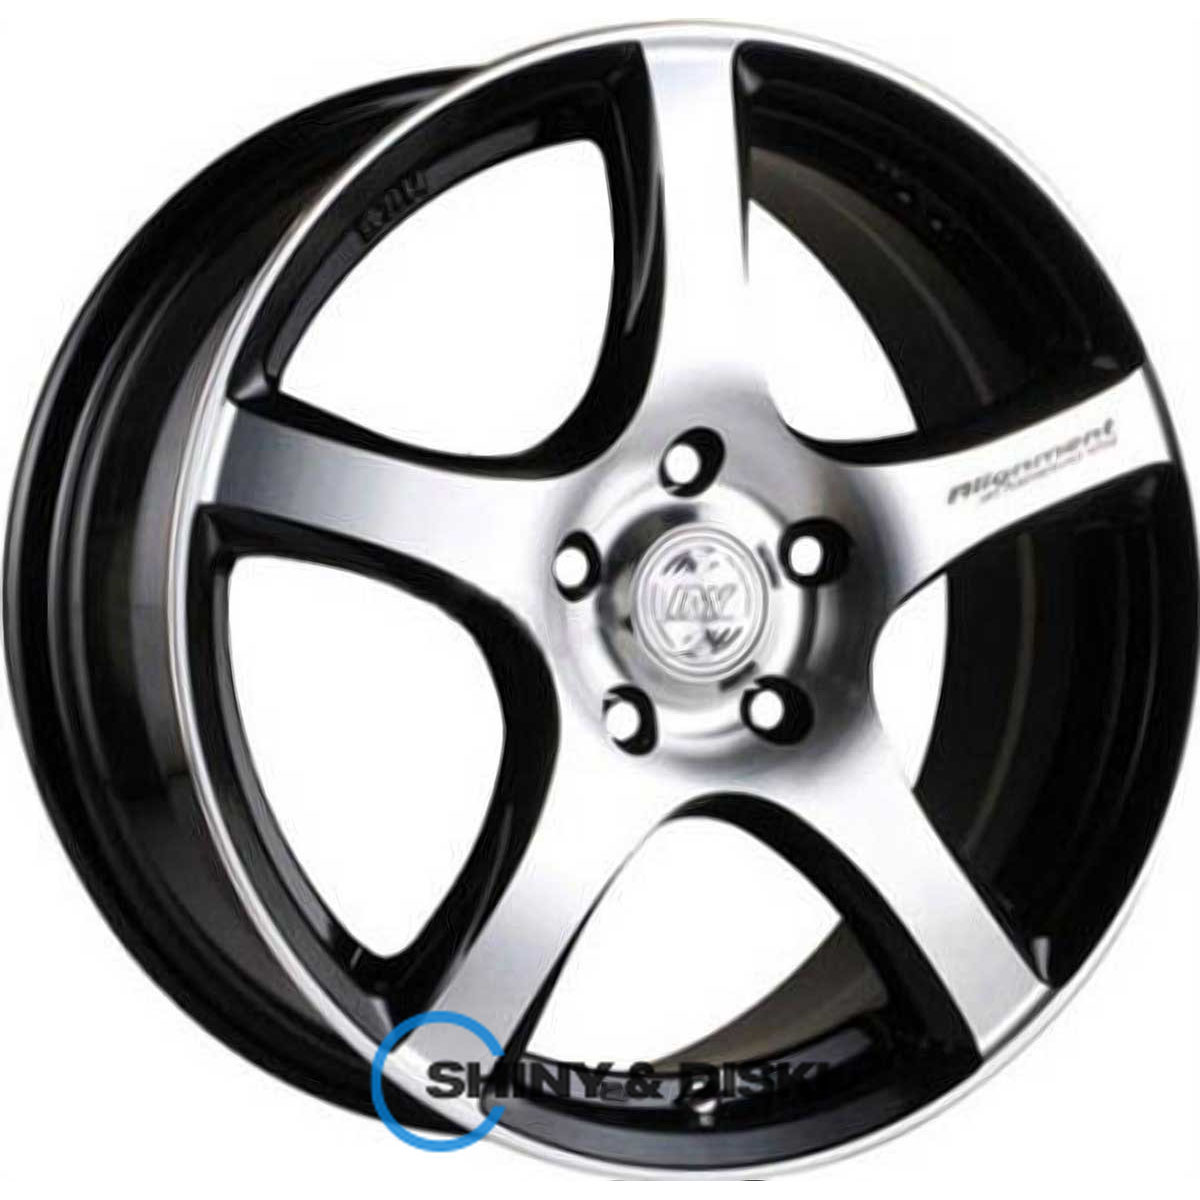 rs tuning h-531 bkfp r16 w7 pcd5x100 et40 dia67.1